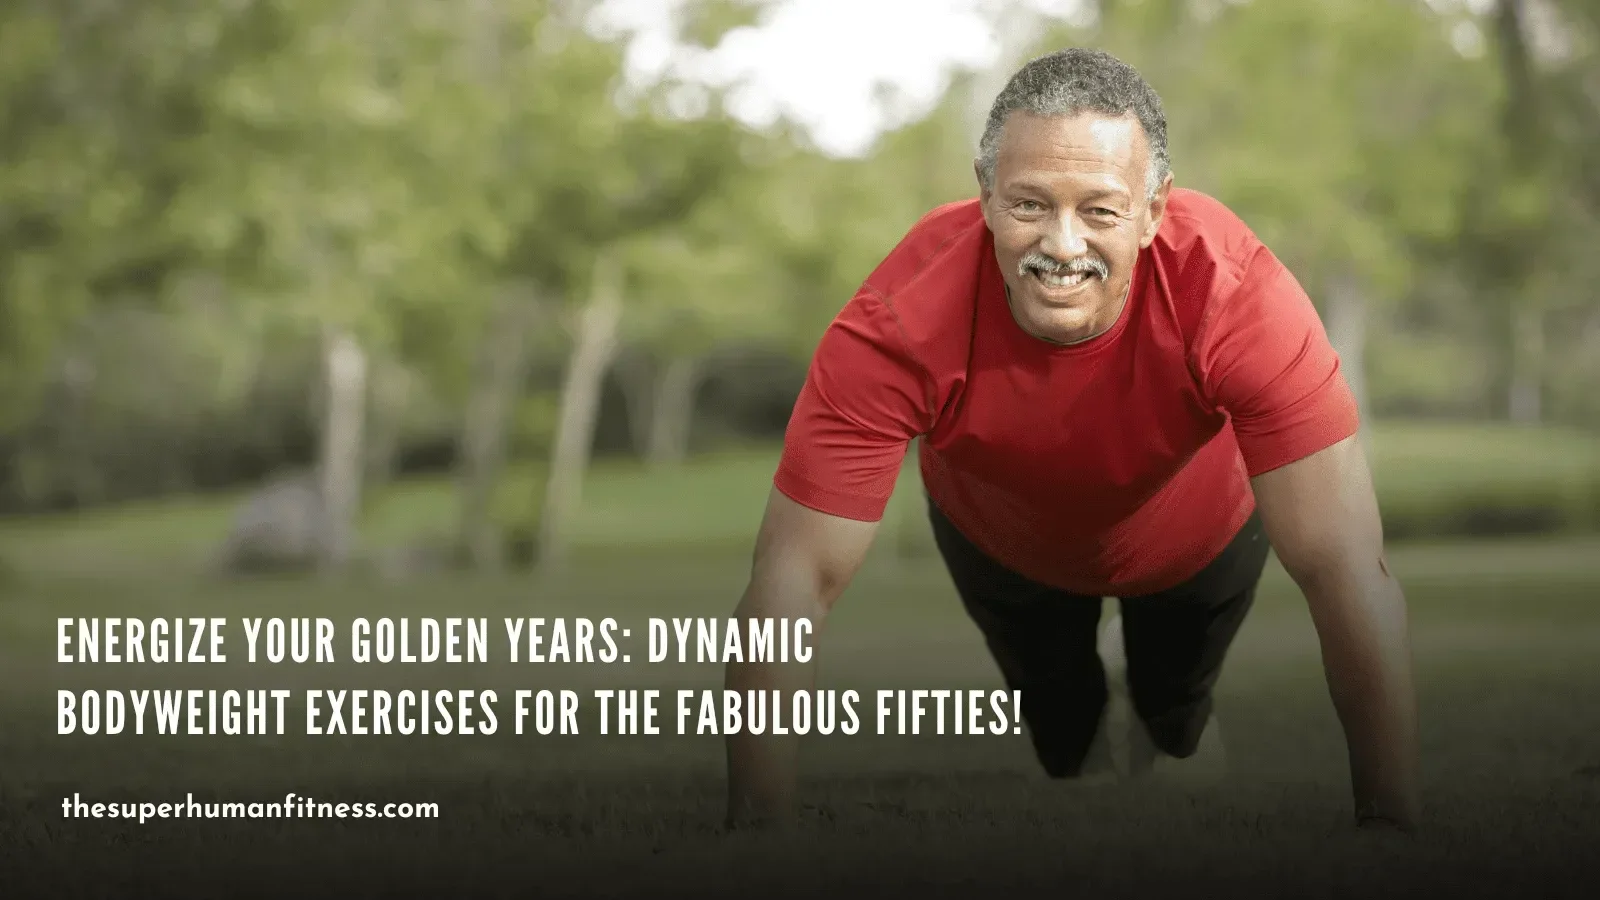 Dynamic Bodyweight Exercises for the Fabulous Fifties!